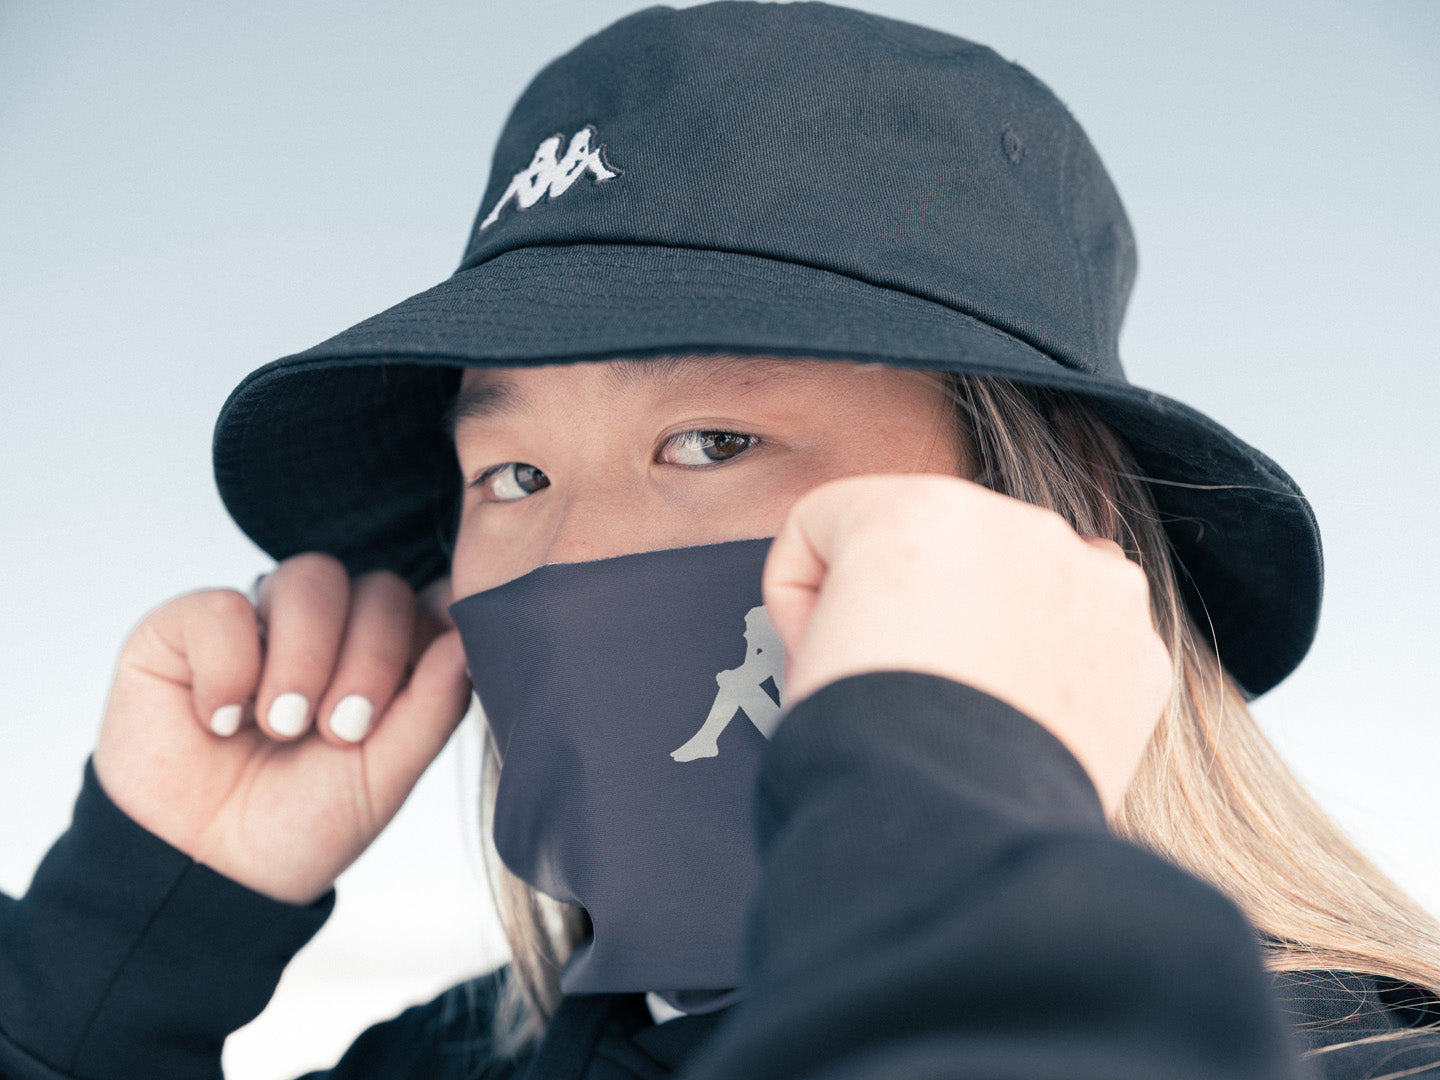 Close up of female US athlete wearing Kappa bucket hat pulling Kappa gator over her mouth and nose.